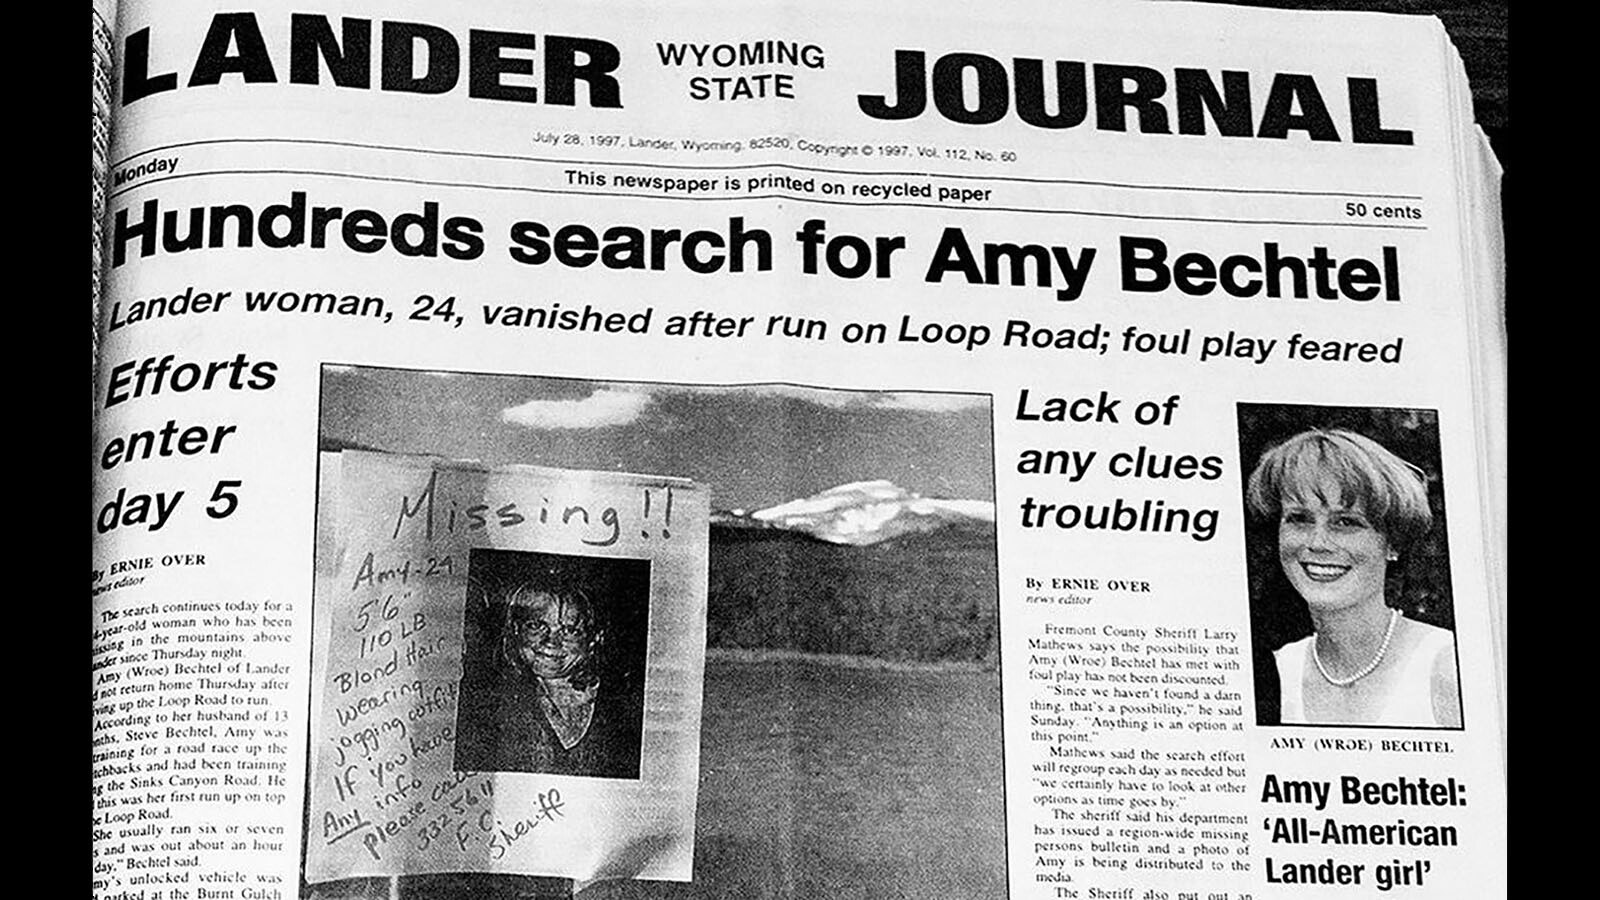 In the days after her disappearance, the search for Amy Wroe Bechtel was intense and headline news, including theJuly 28, 1997, issue of the Lander Journal.